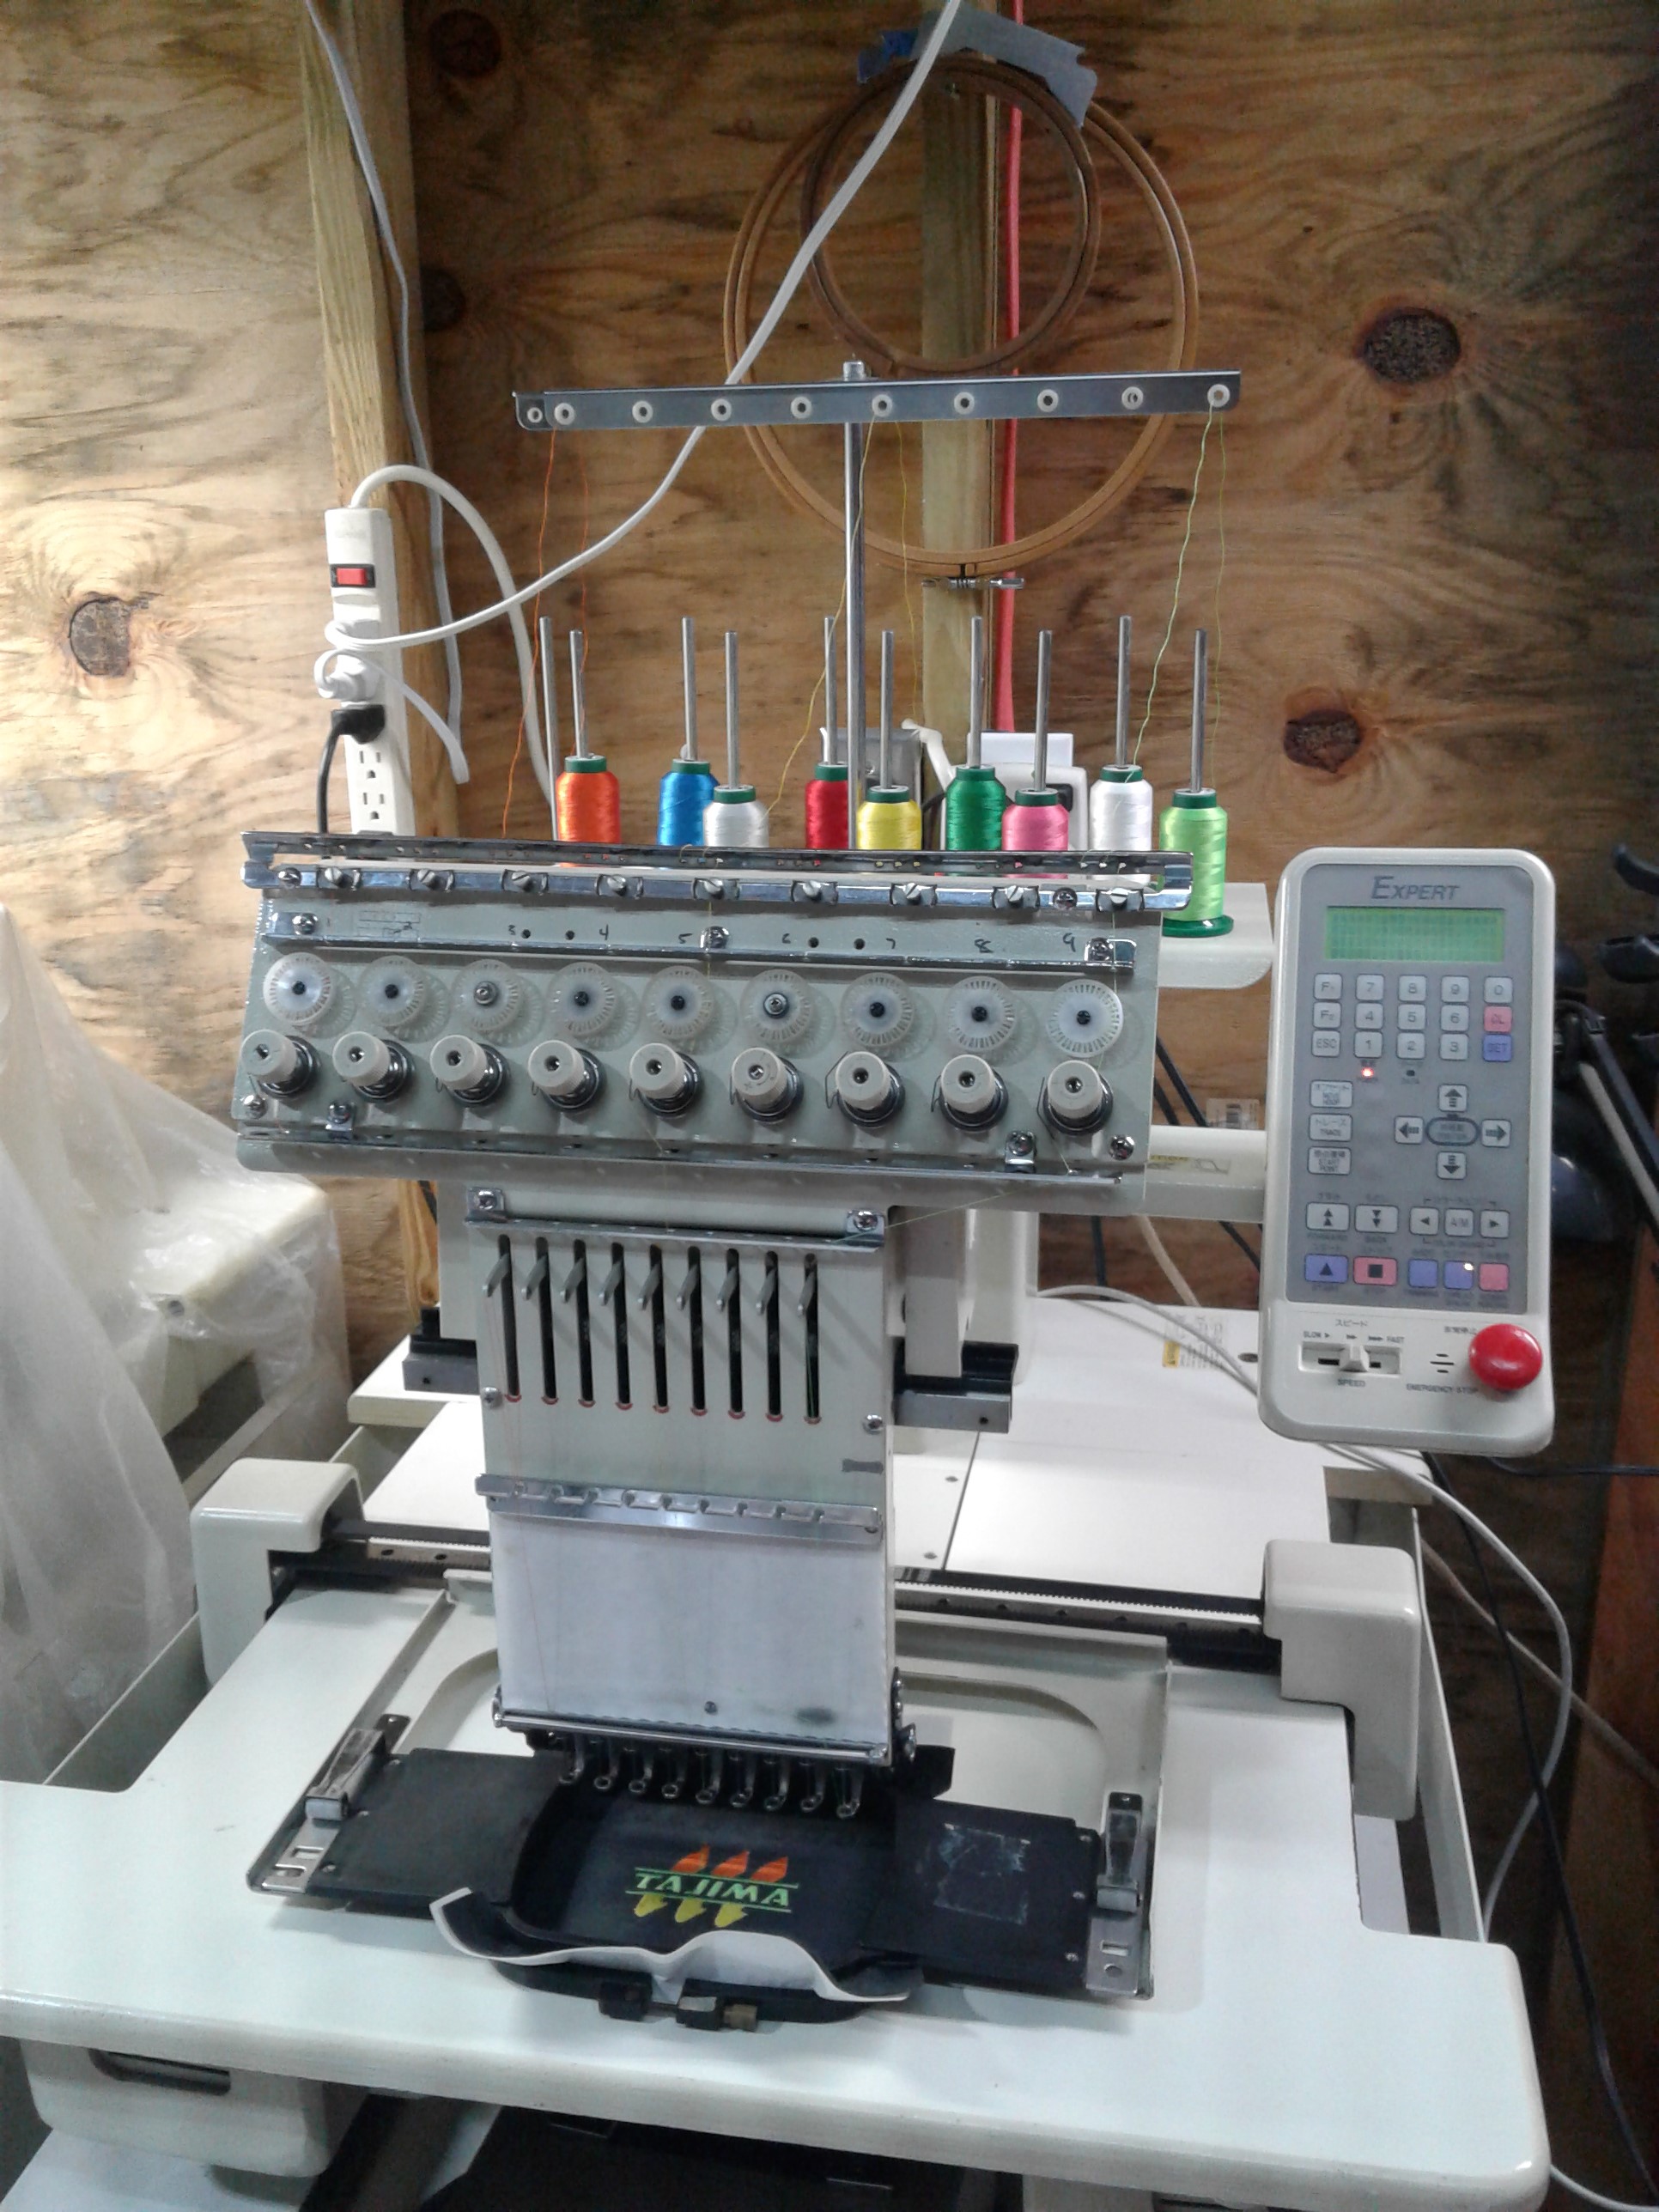 Toyota ESP Expert AD830 commercial embroidery machine w